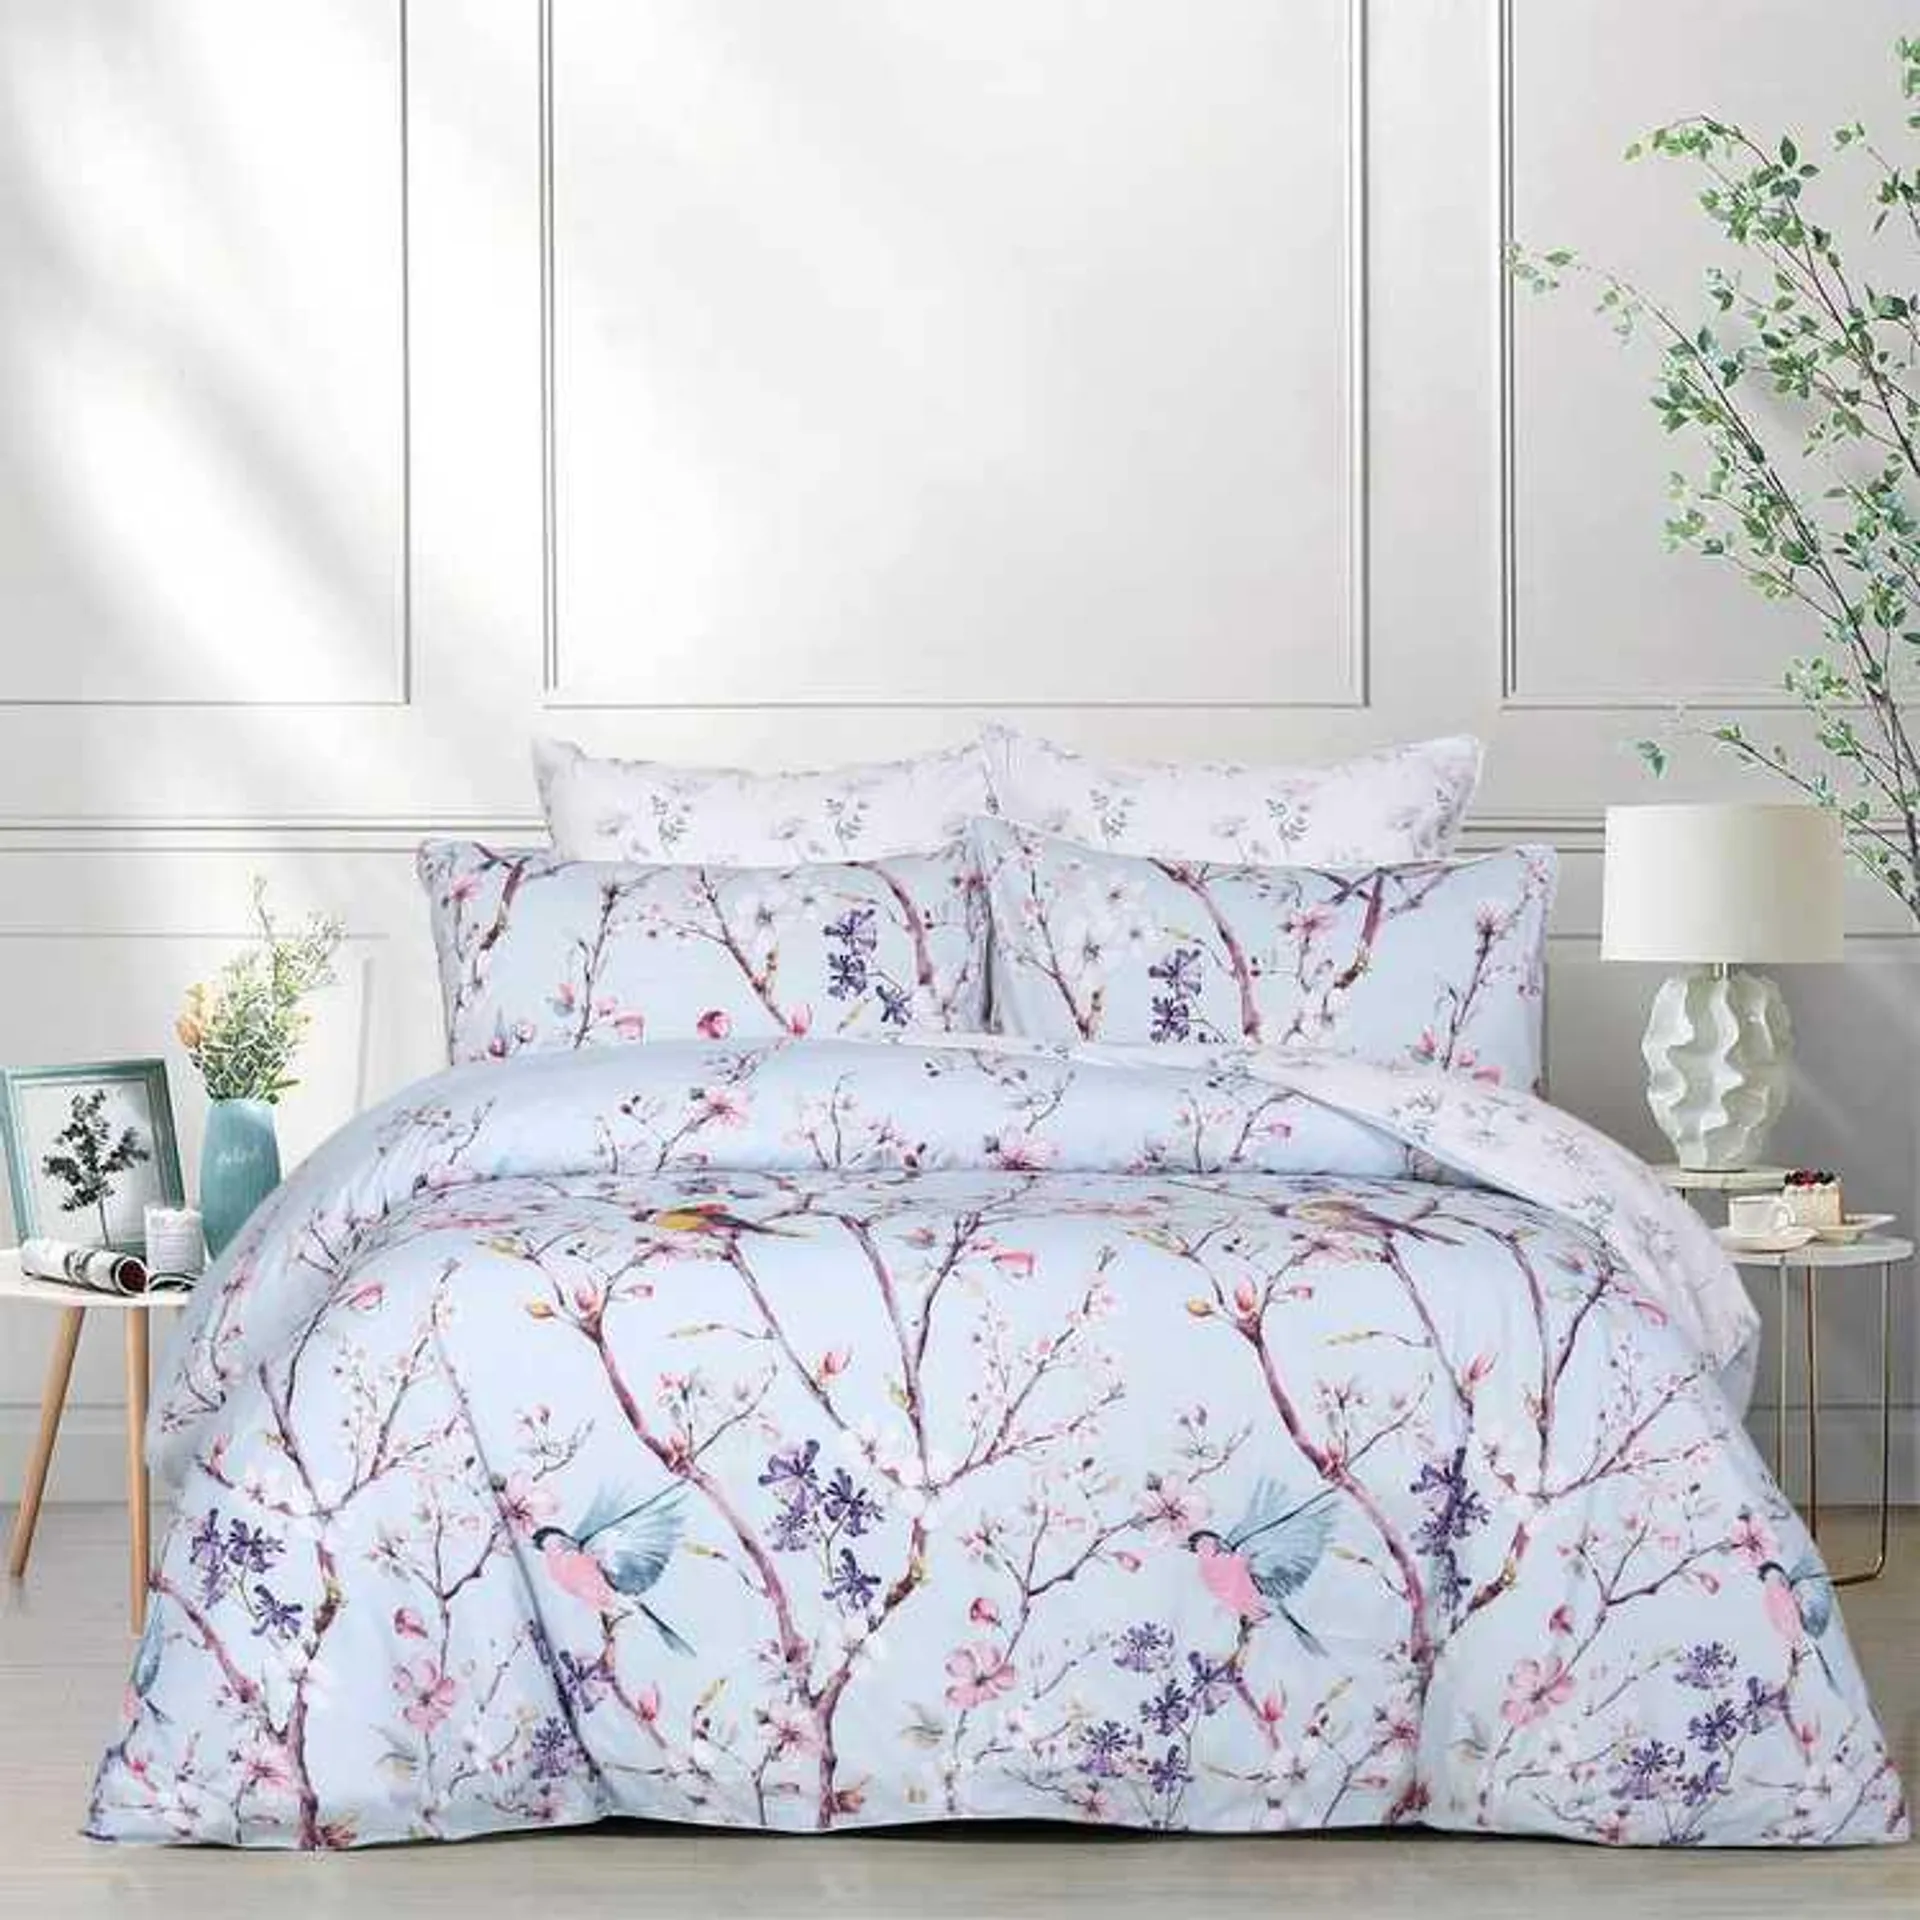 KOO Anwen Embroidered Quilt Cover Set Pale Blue